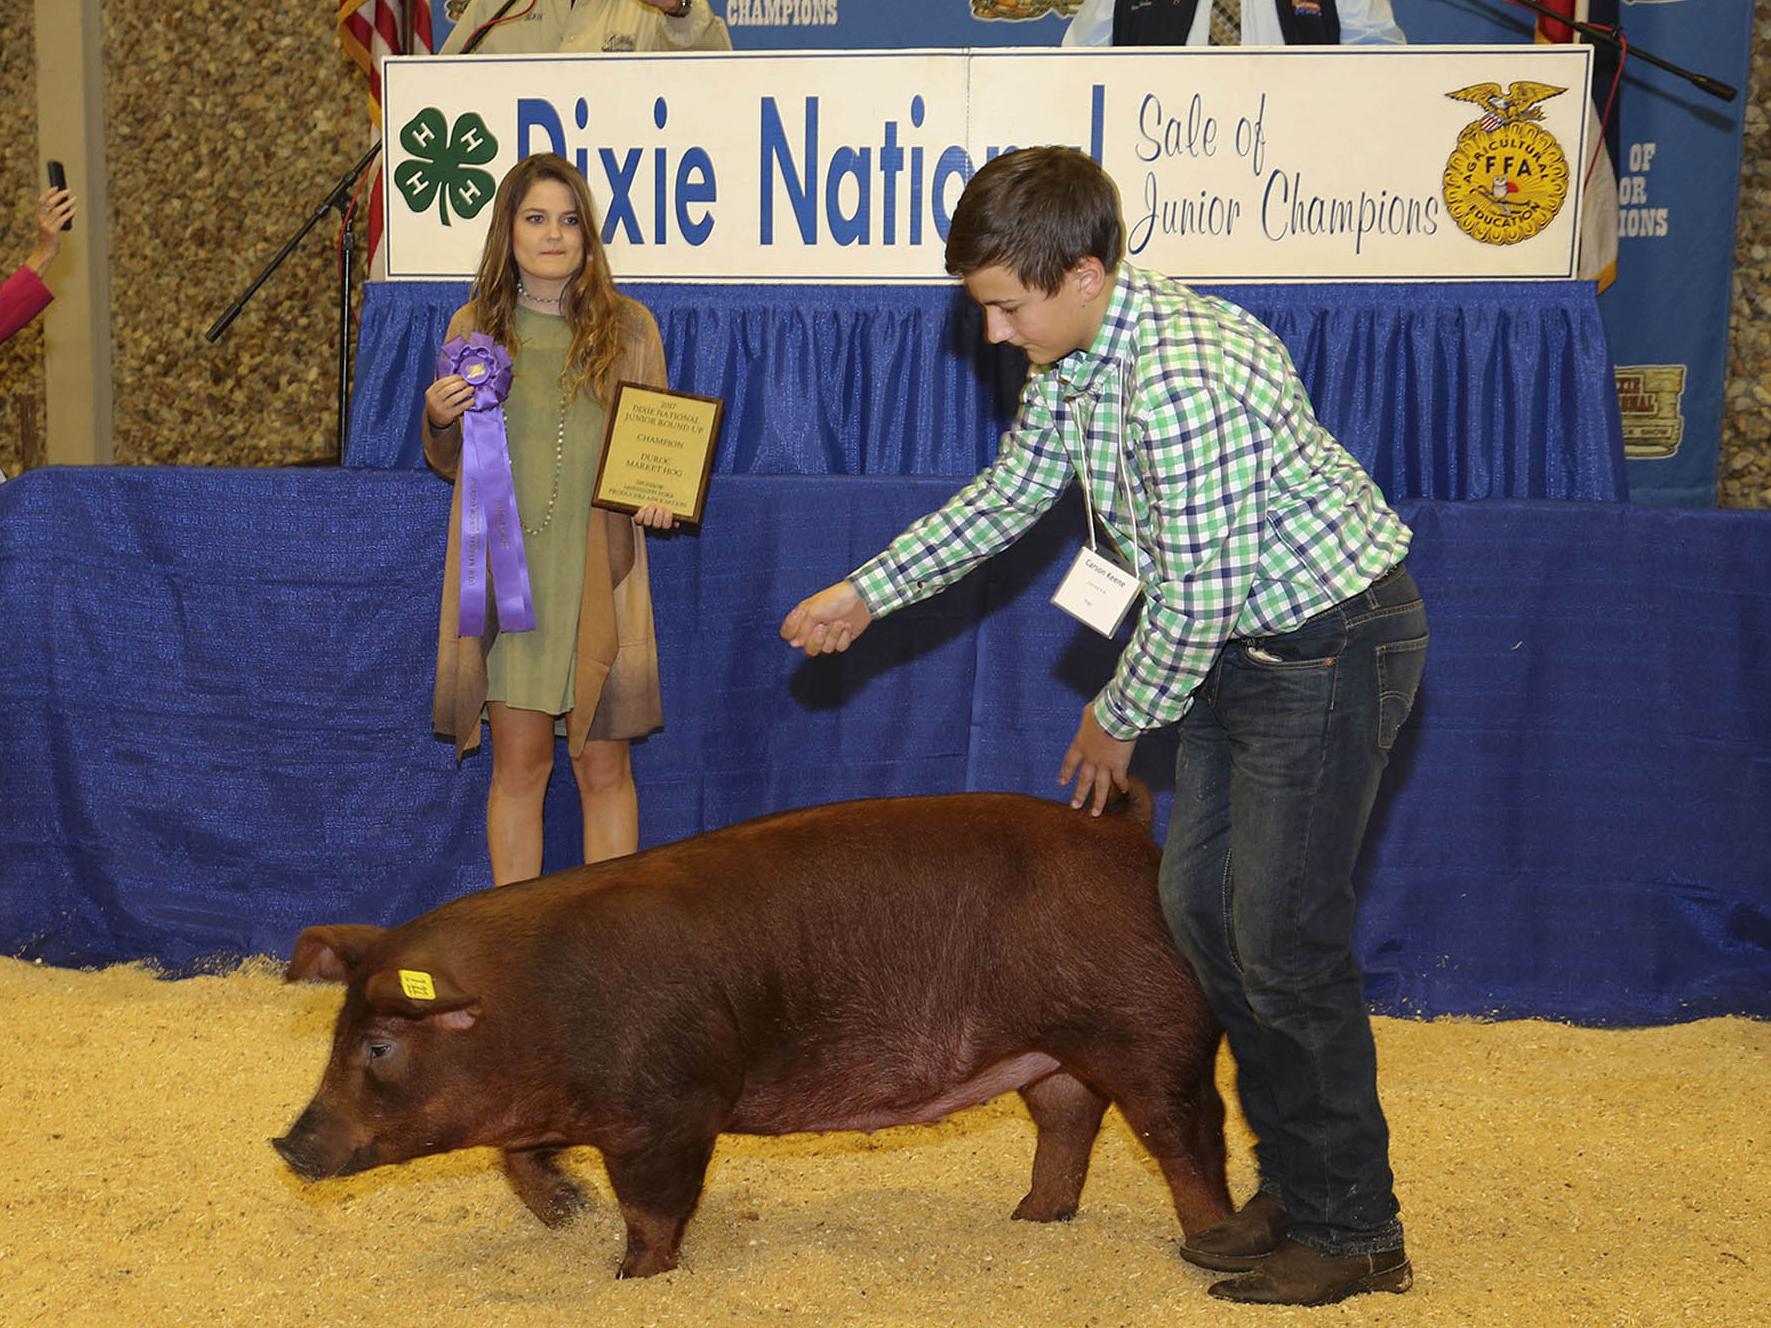 Twelve-year-old Carson Keene shows off his champion Duroc hog for bidders at the 2017 Dixie National Sale of Junior Champions Feb. 9, 2017, as his stepsister, Alexandra Pittman, looks on. (Photo courtesy of Jeff L. Homan)